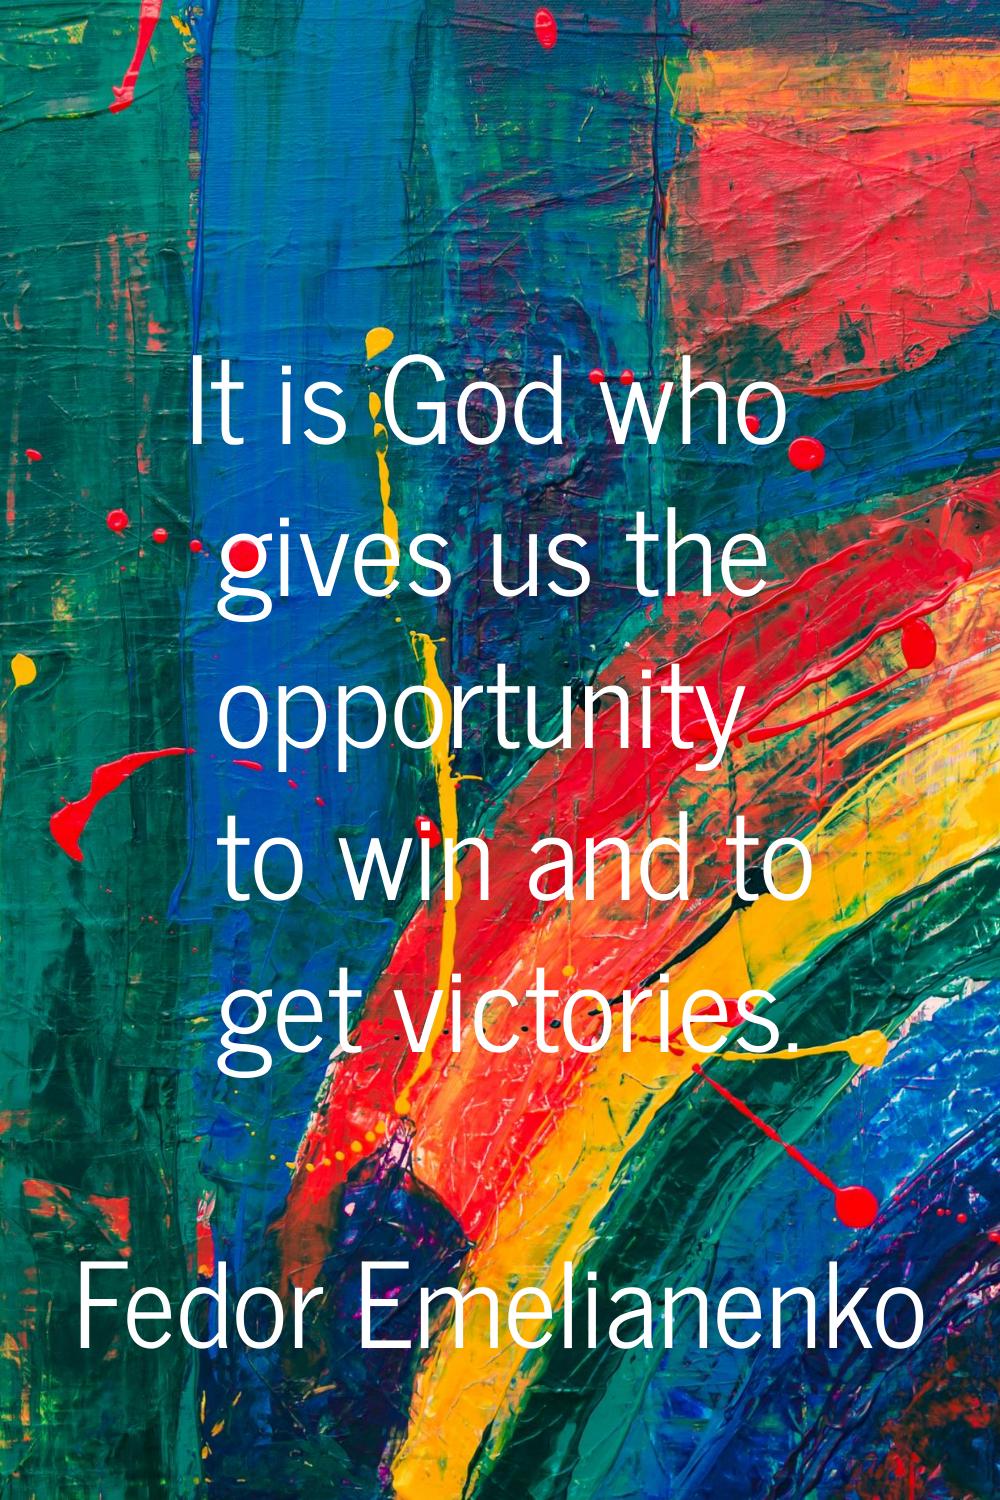 It is God who gives us the opportunity to win and to get victories.